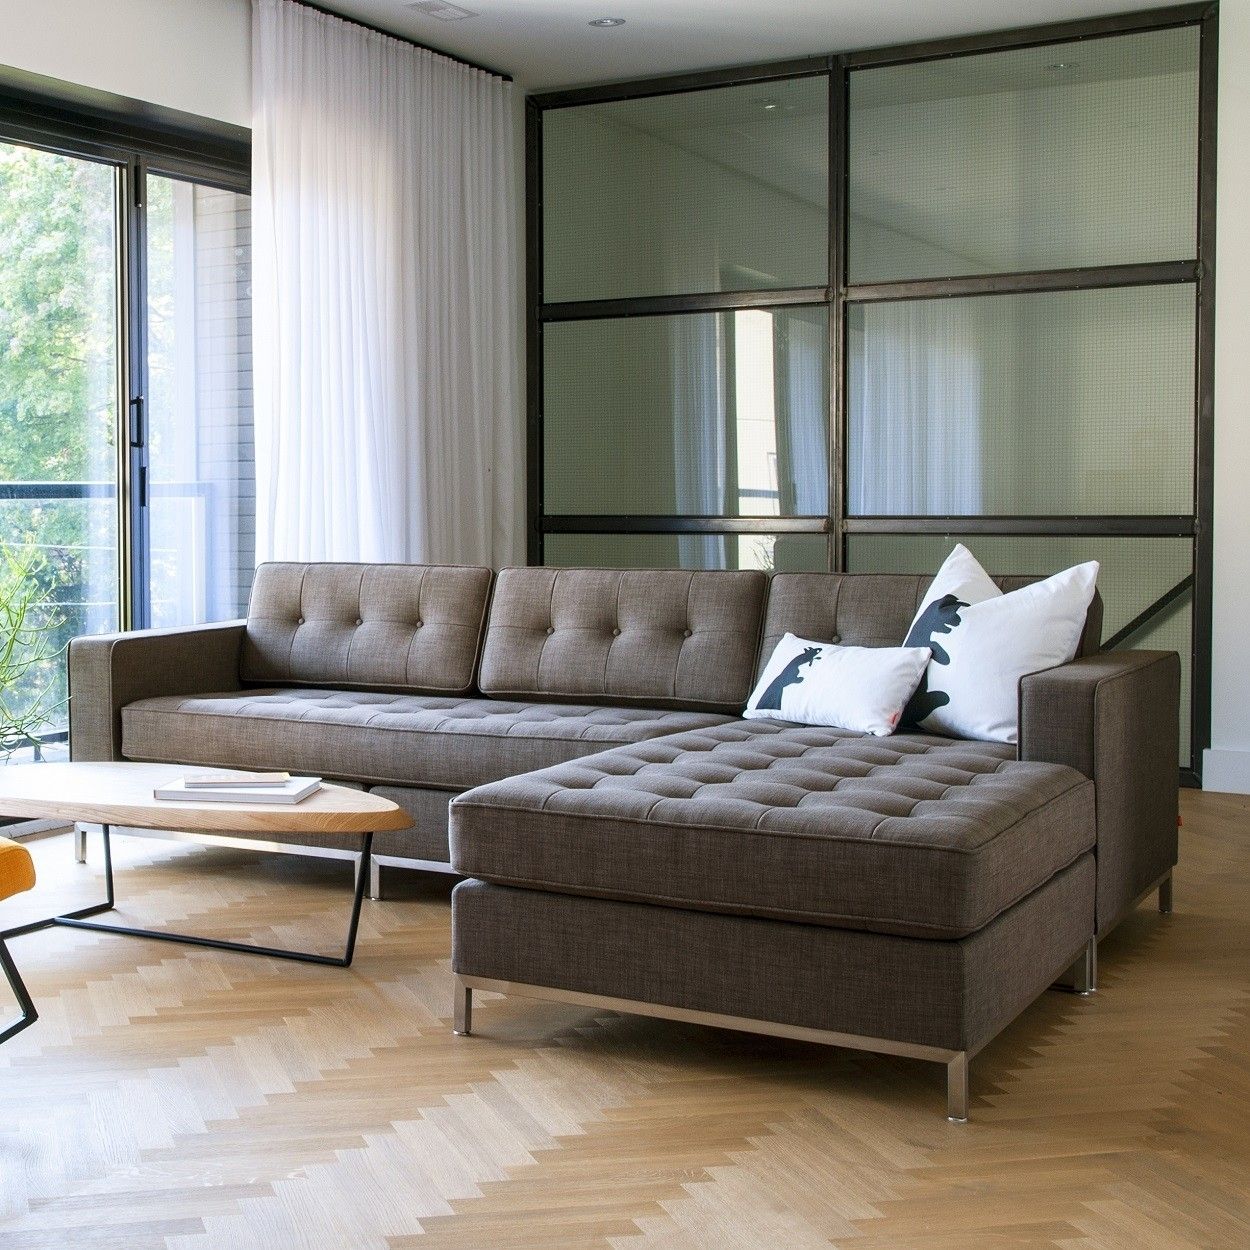 Modern Sectional Sofas For Sale (View 6 of 10)